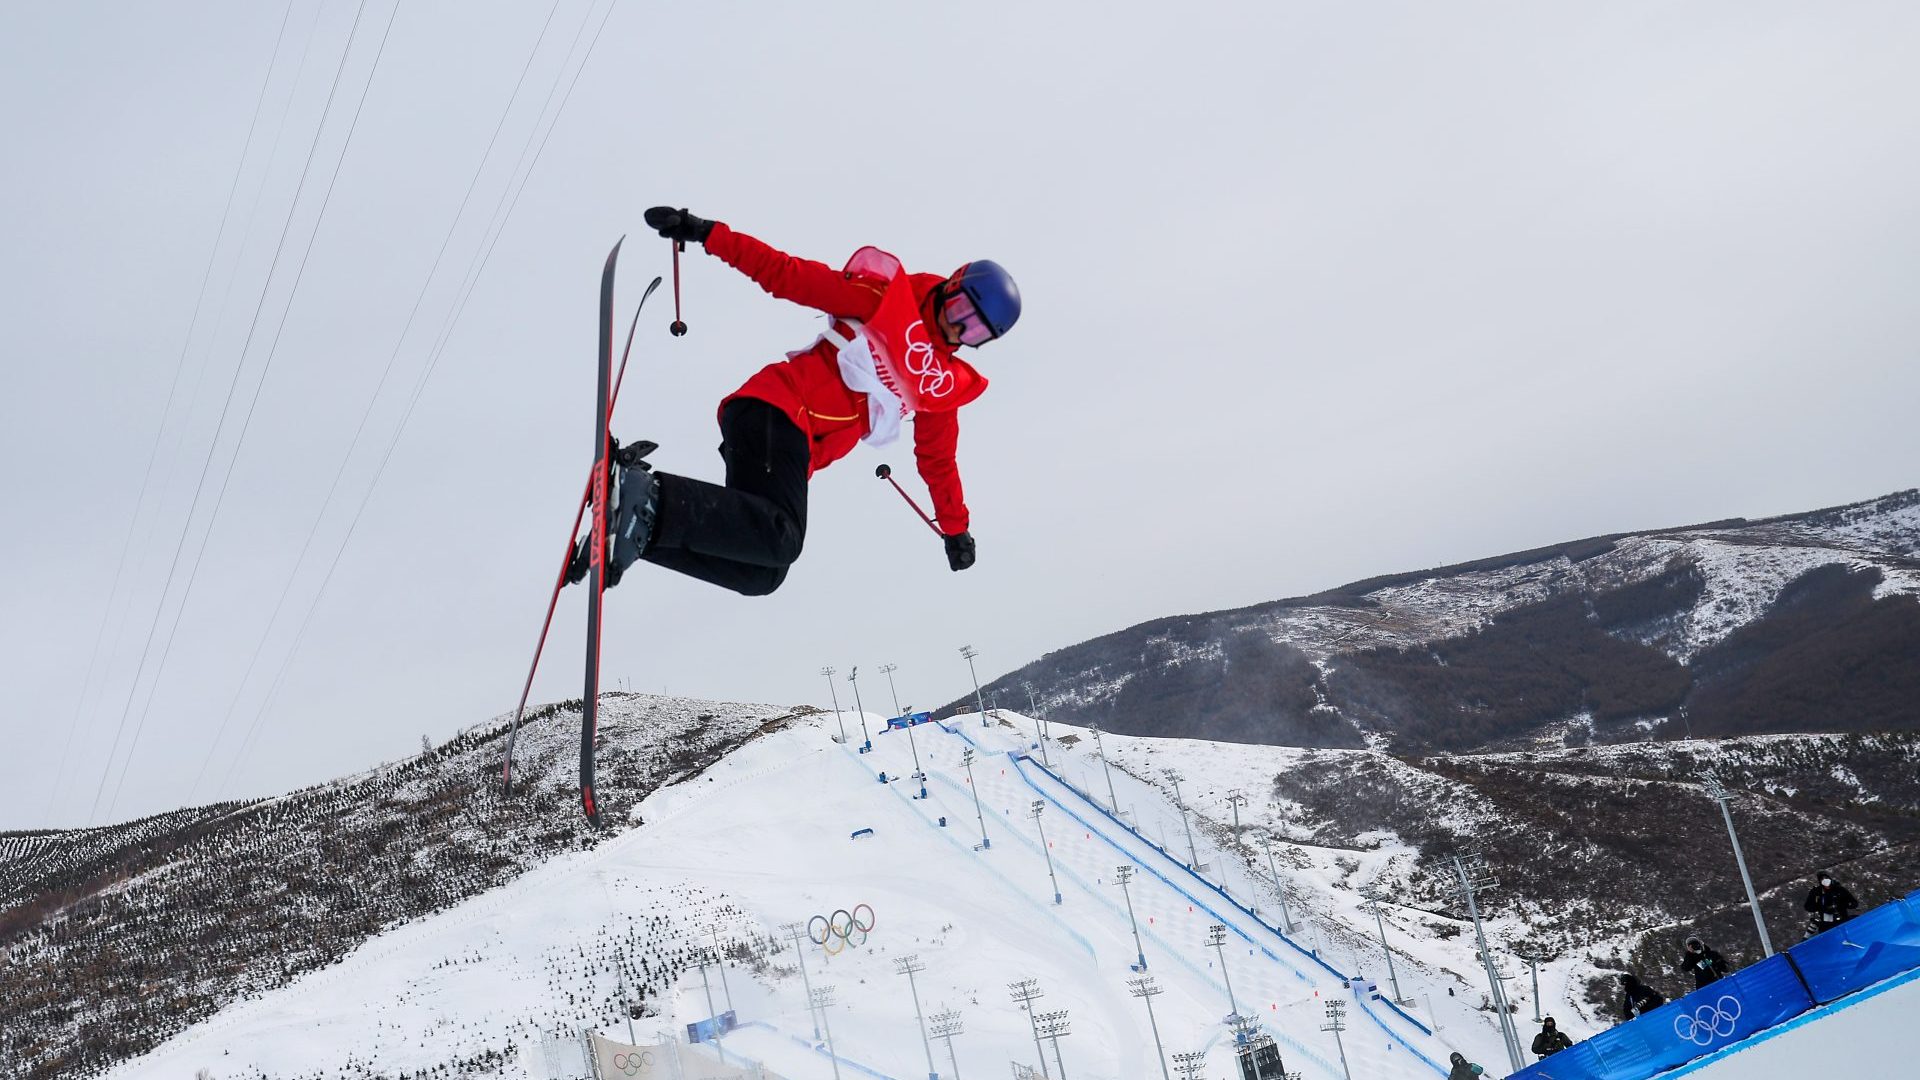 Ailing Eileen Gu of Team China performs a trick in practice ahead of the Women's Freestyle Skiing Freeski Halfpipe Qualification on Day 13 of the Beijing 2022 Winter Olympics at Genting Snow Park on February 17, 2022 in Zhangjiakou, China. (Photo by Maja Hitij/Getty Images)